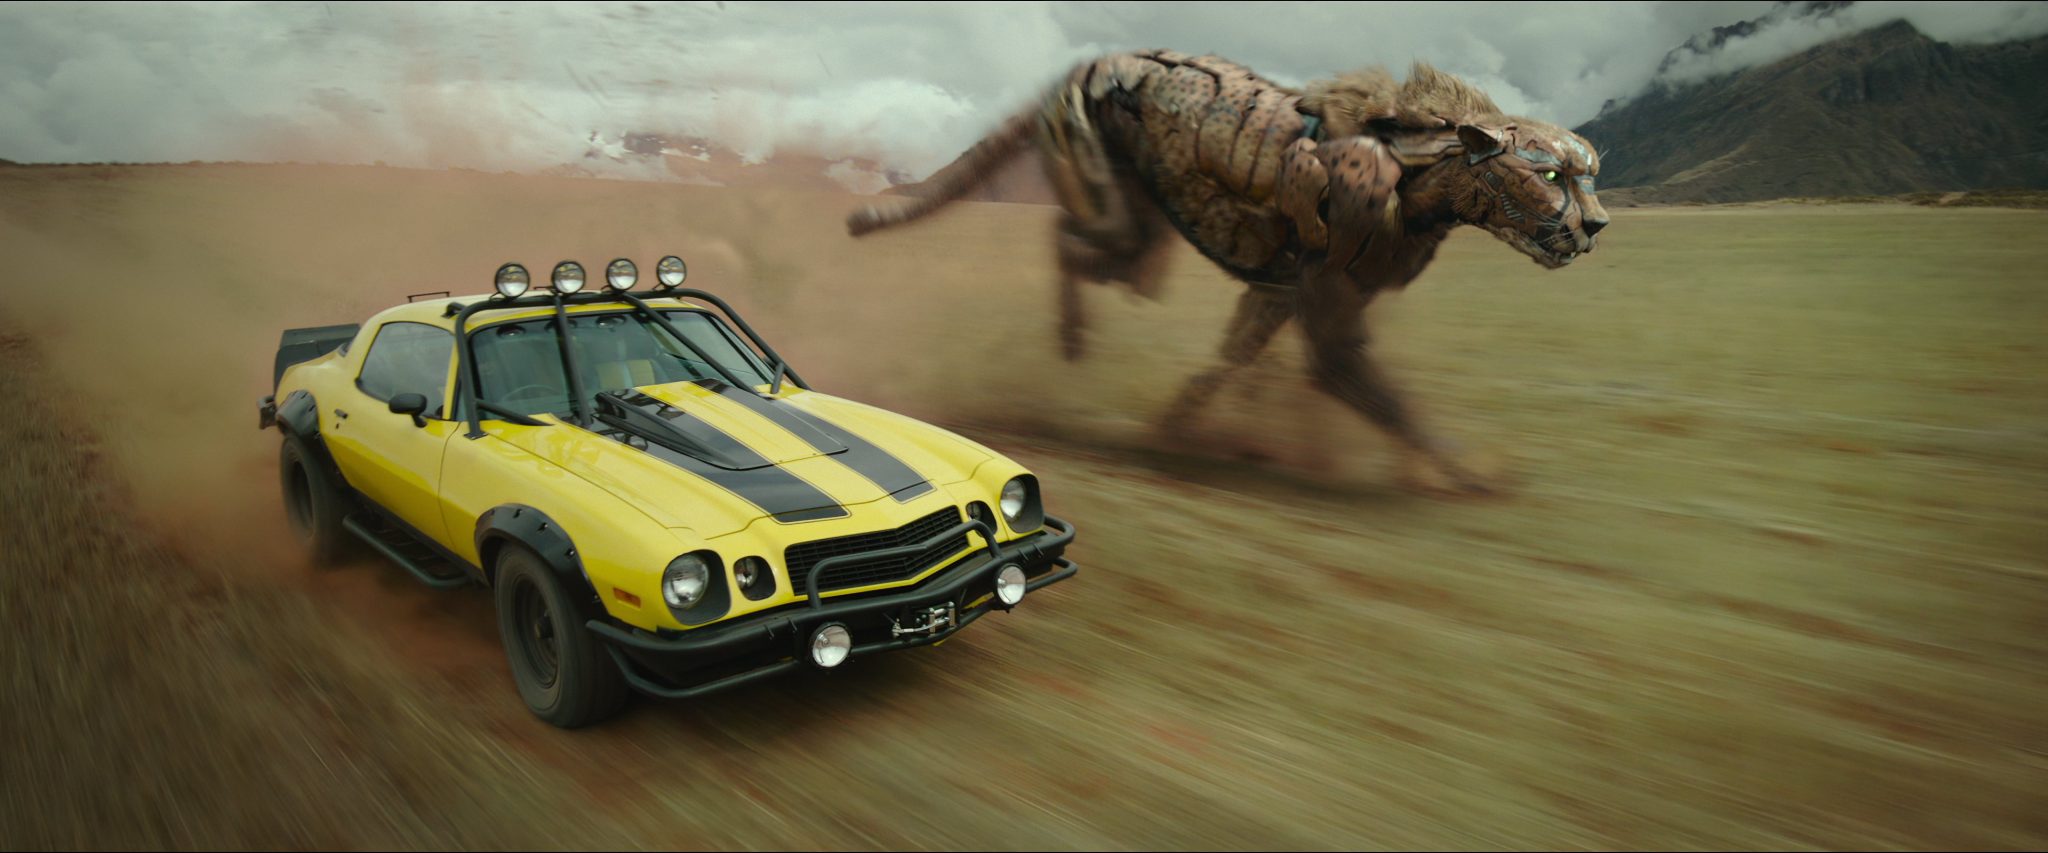 Credit: Paramount Pictures (Transformers: Rise of the Beasts)